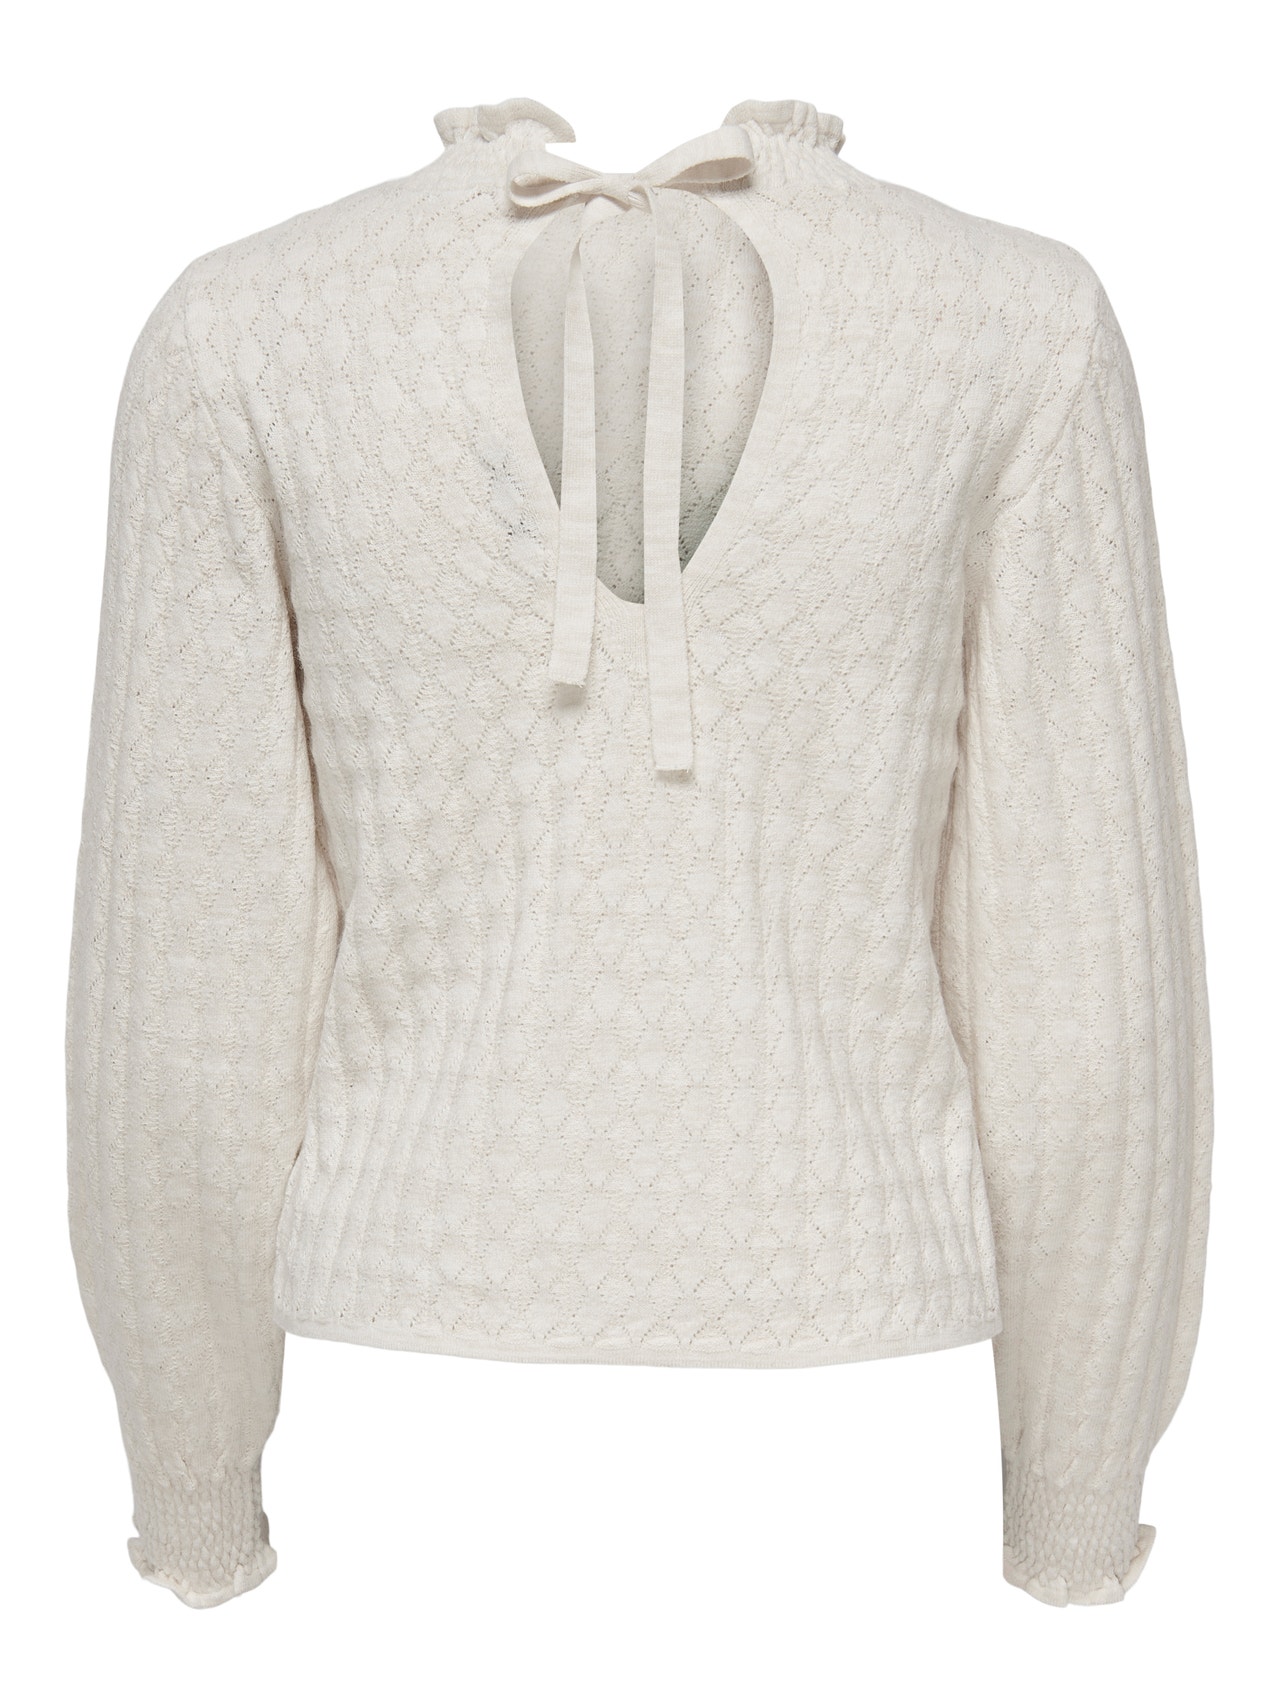 ONLY Pull-overs Col haut -Winter White - 15265738